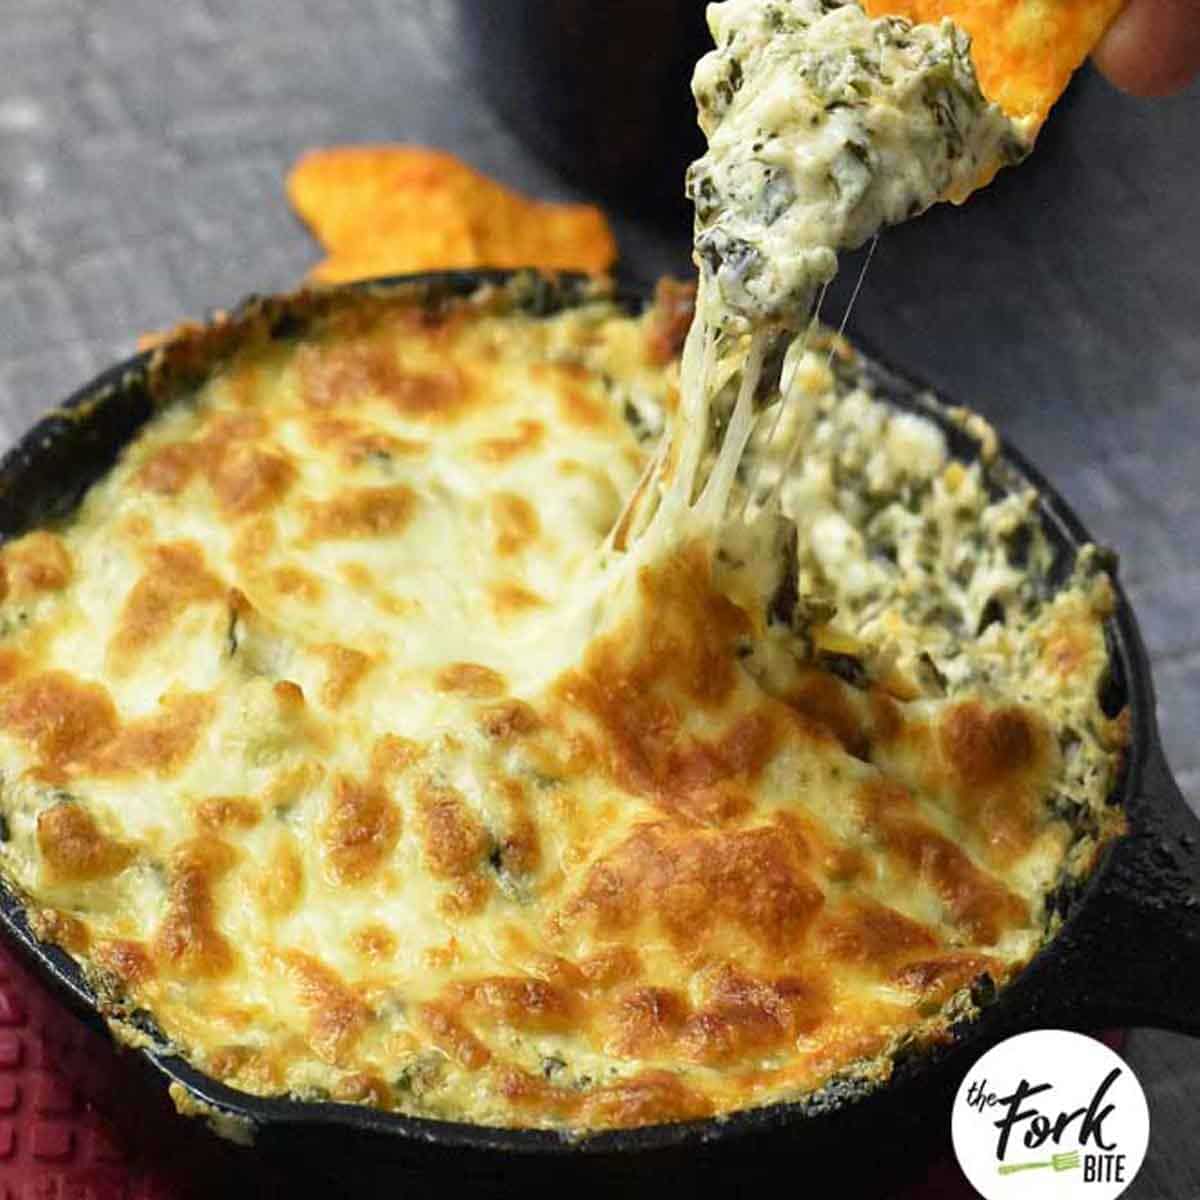 This sumptuous spinach artichoke dish is one of those yummy recipes that you can start in the morning and munch on all day or whip it up early and forget it while you get all other dishes ready for any party or get-together.